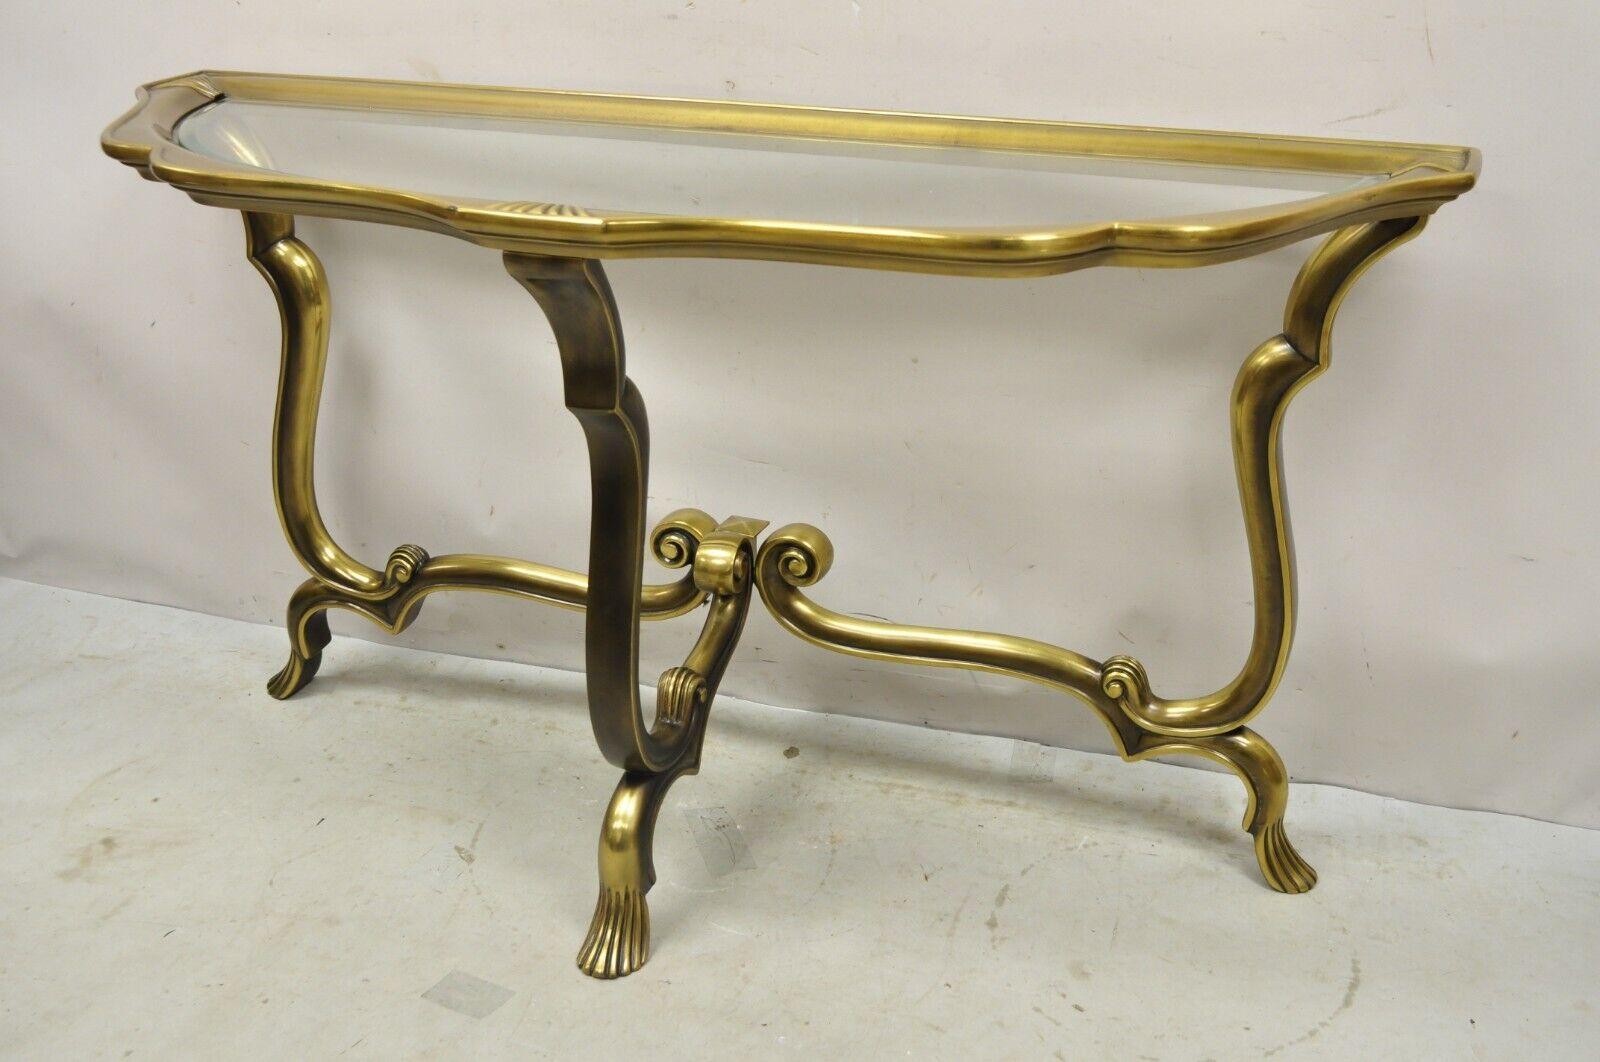 Vintage Italian Brass Hollywood Regency Glass Top Console Sofa Hall Table. Item features a burnished brass finish, metal frame, Beveled glass top, sleek sculptural form. Circa Mid to late 20th Century. Measurements: 28.5